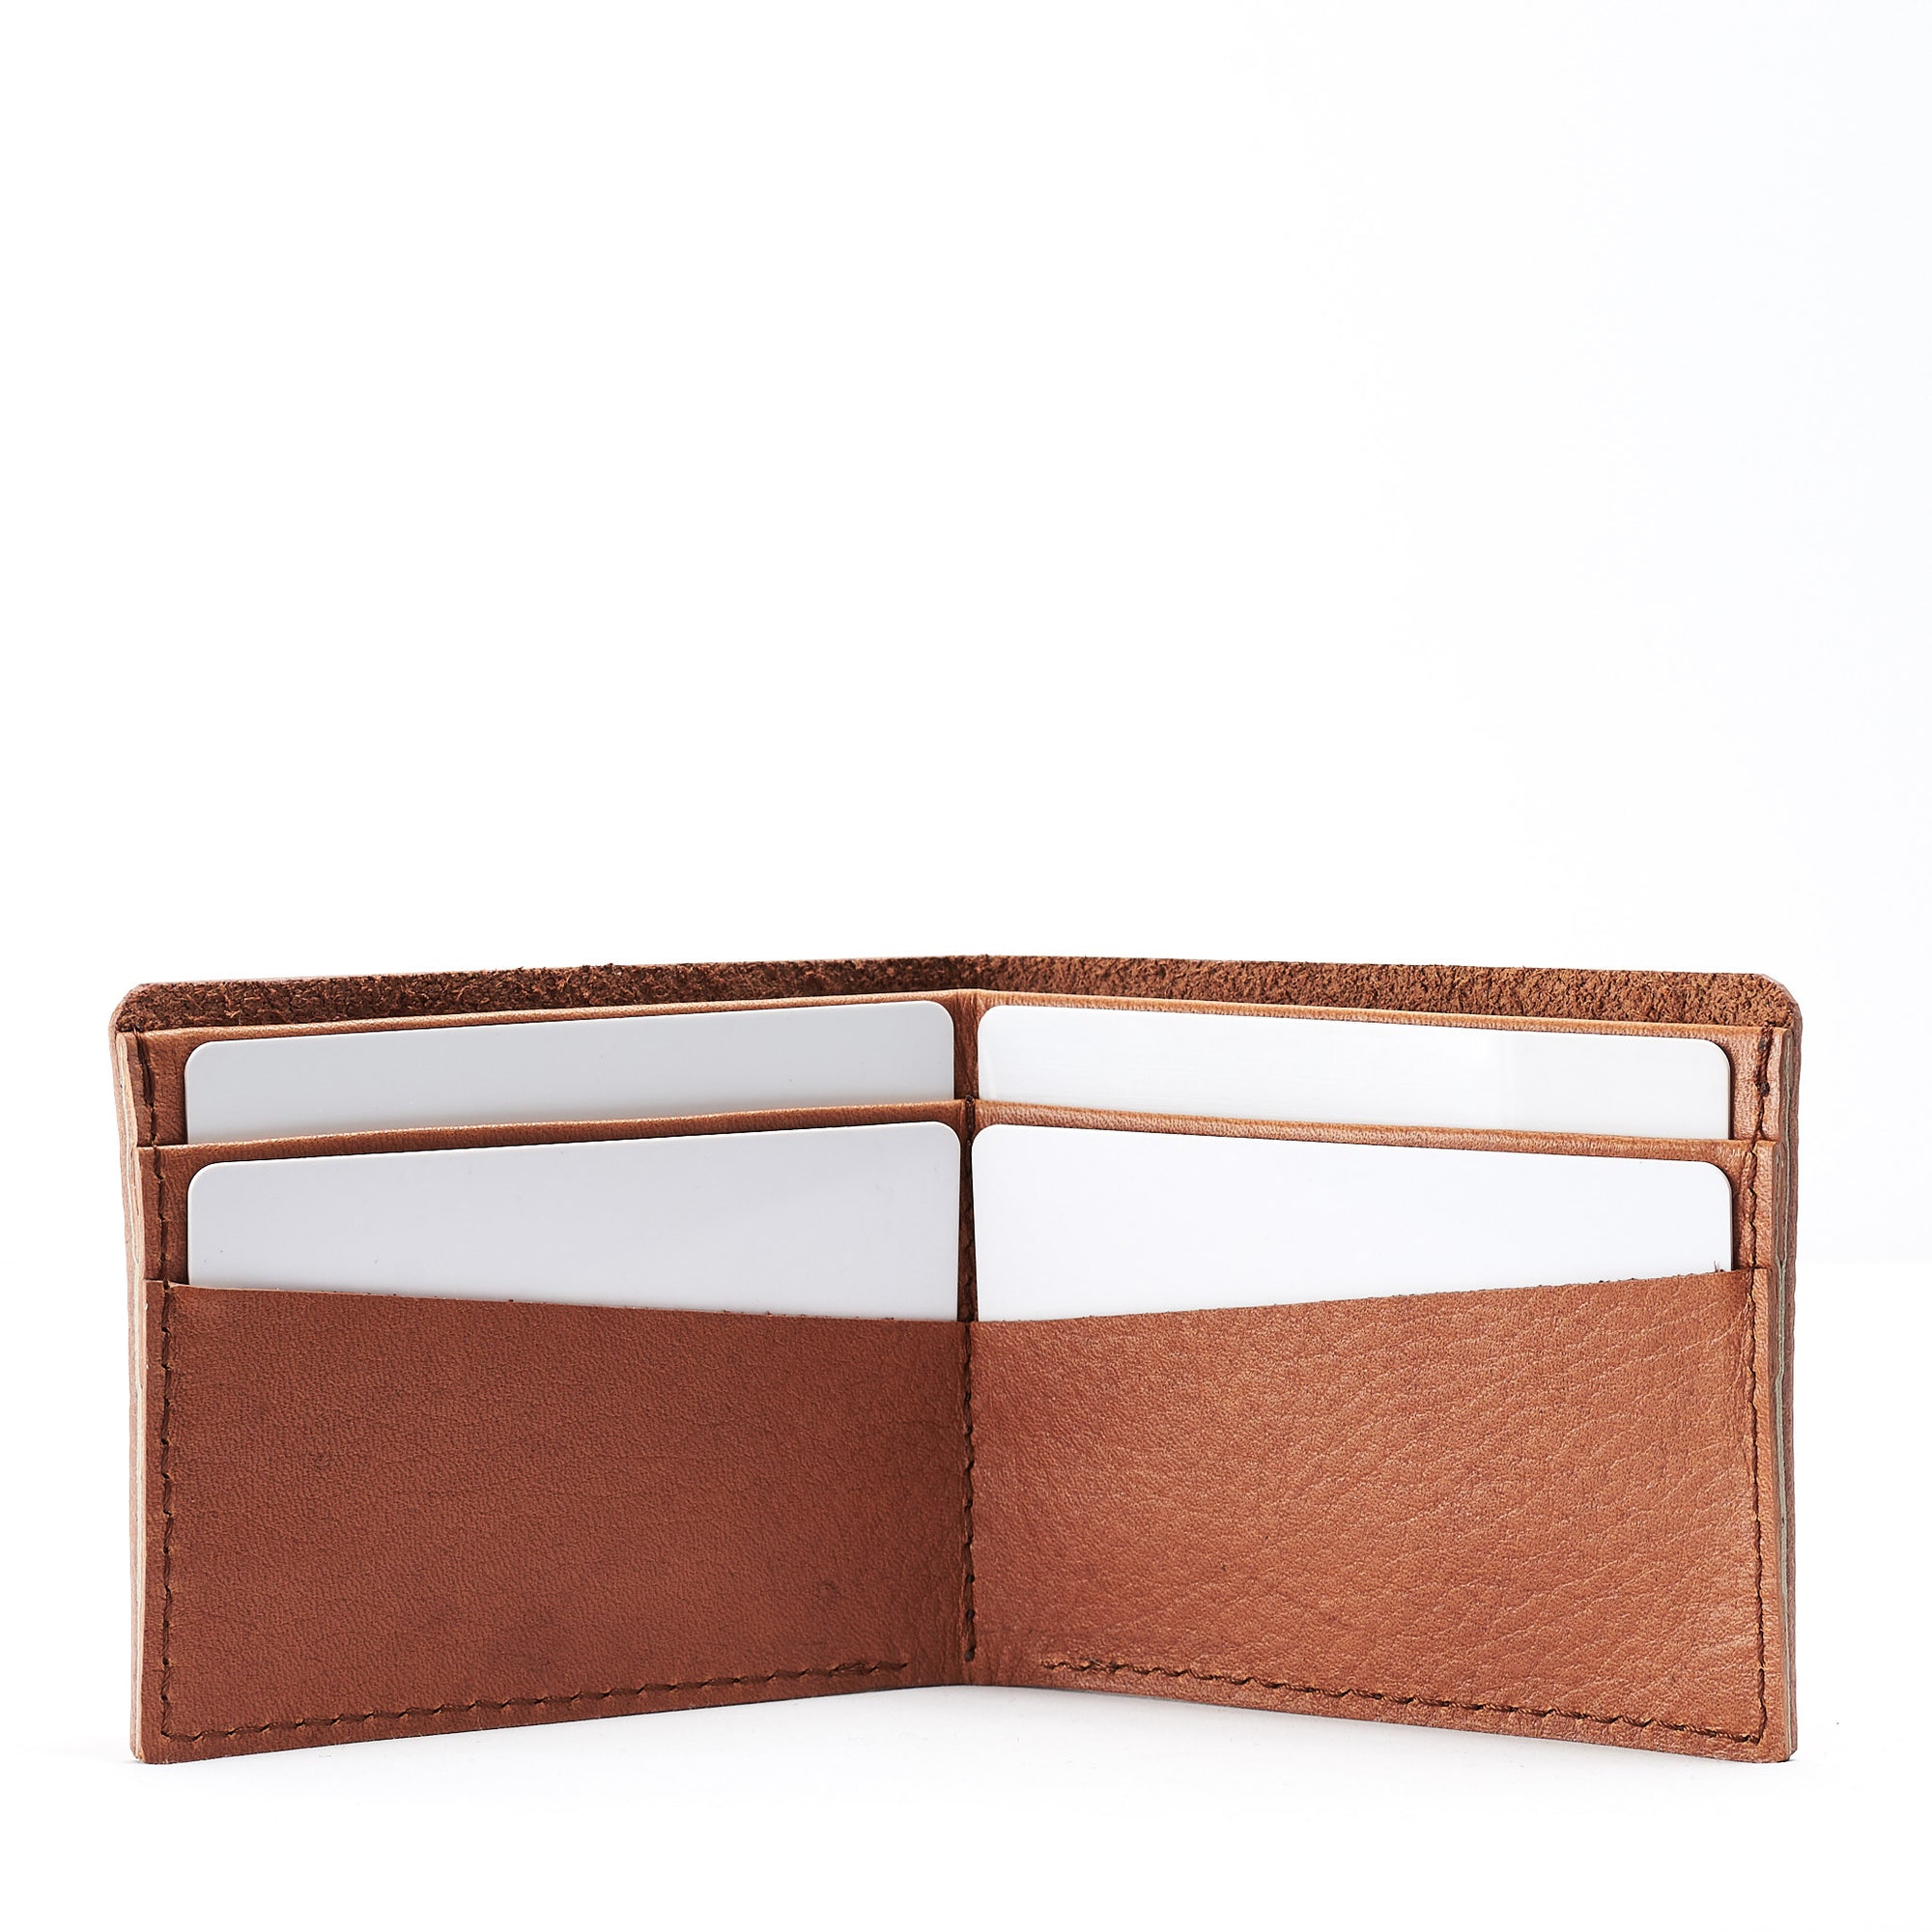 Open. Leather light brown slim wallet gifts for men handmade accessories. minimalist full grain leather thin wallet